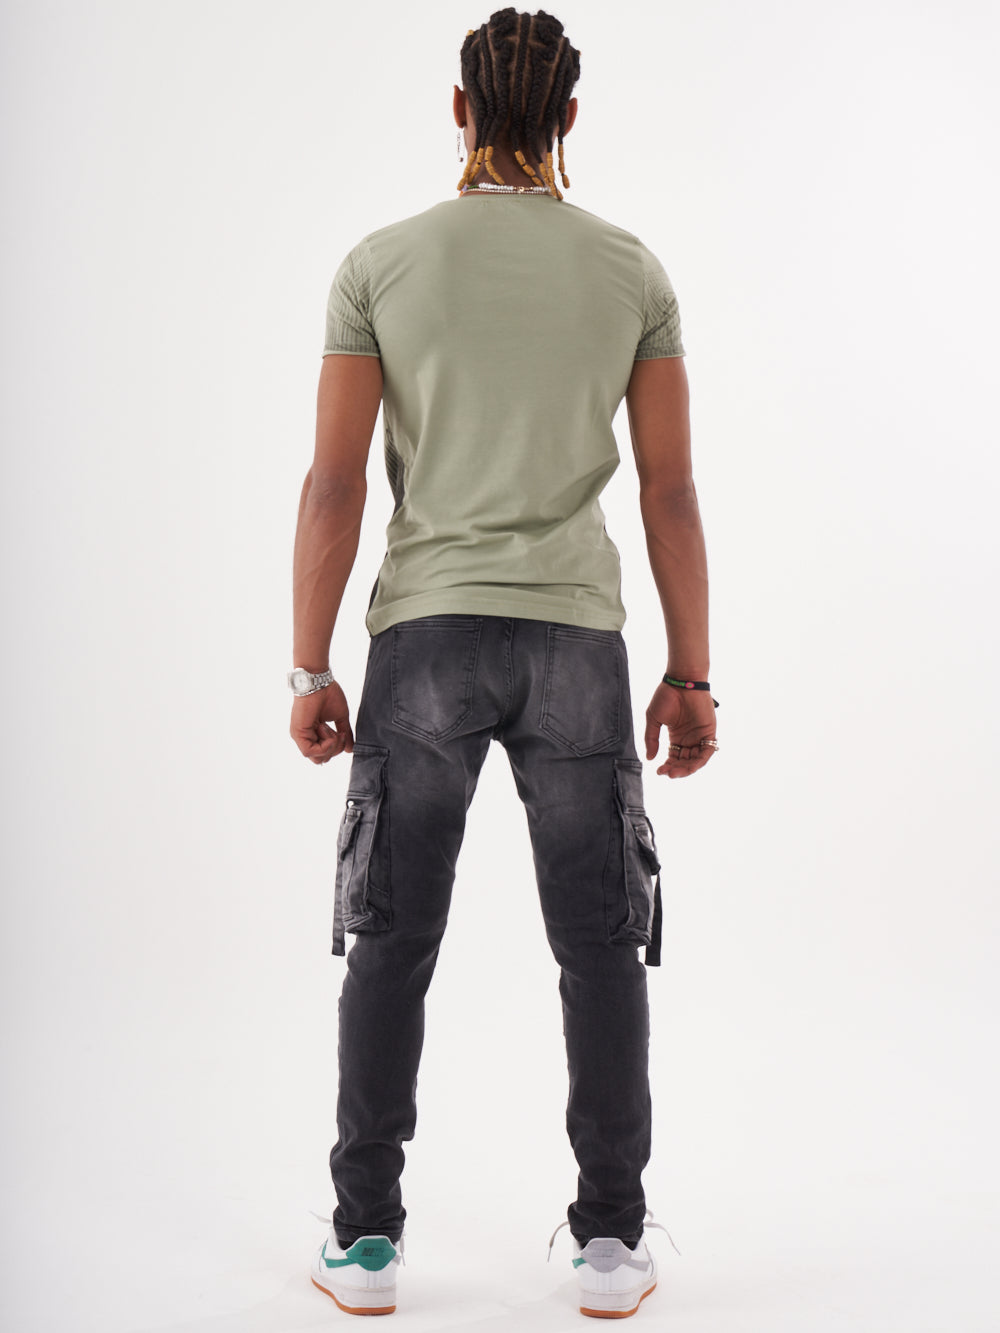 The back view of a man wearing a NIRVANA T-SHIRT | GREEN and cargo pants.